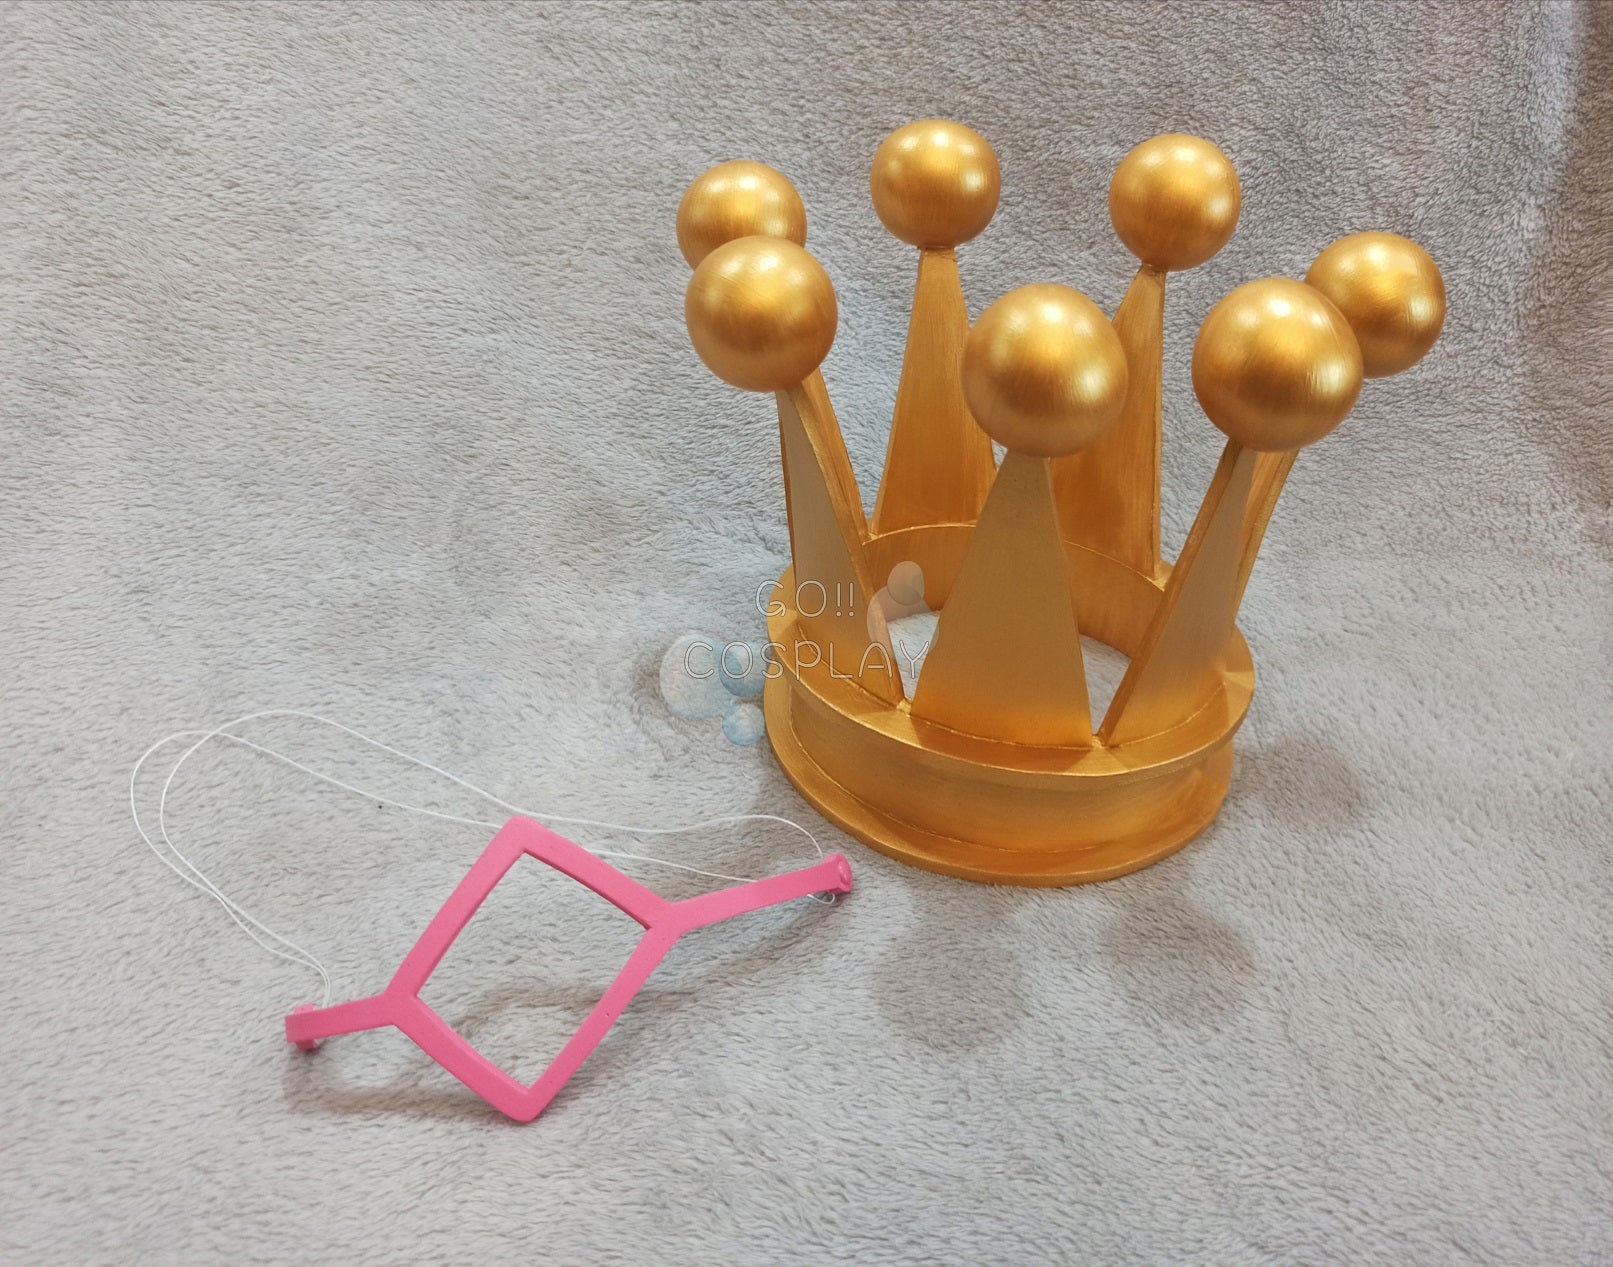 Sugar One Piece Cosplay Eyepatch and Crown Buy